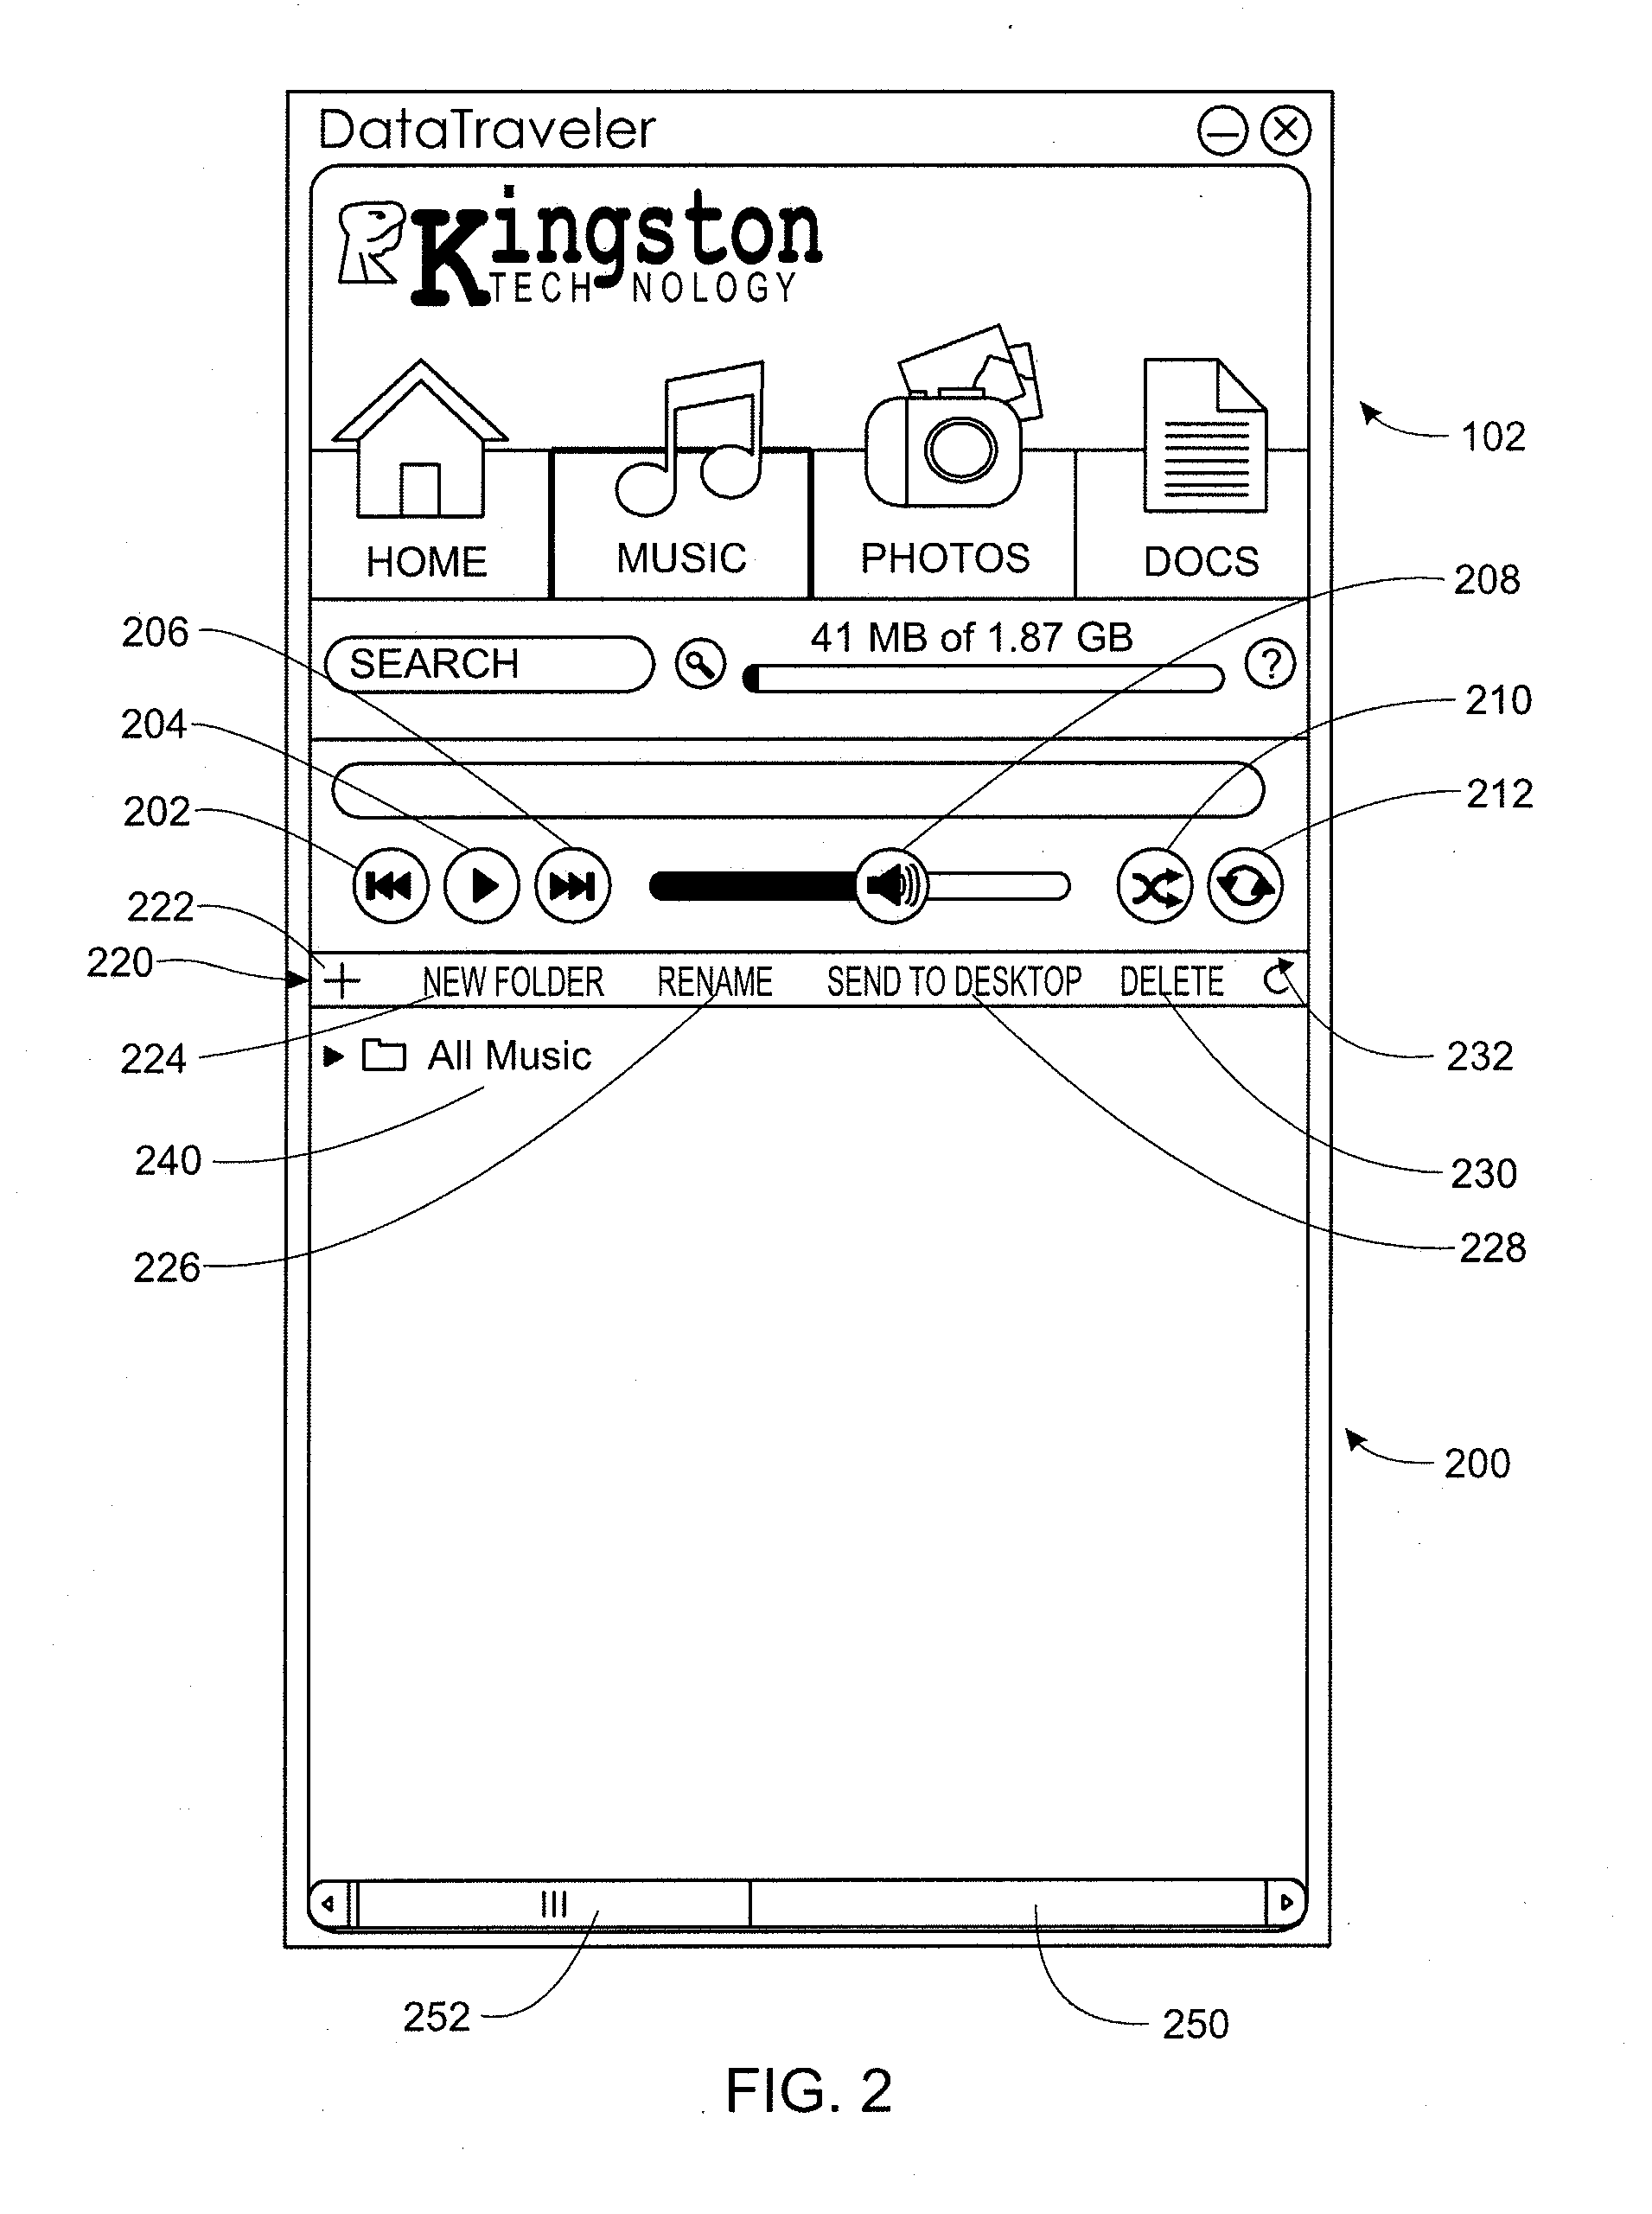 Method of advertising and a portable memory device for use as an advertising platform